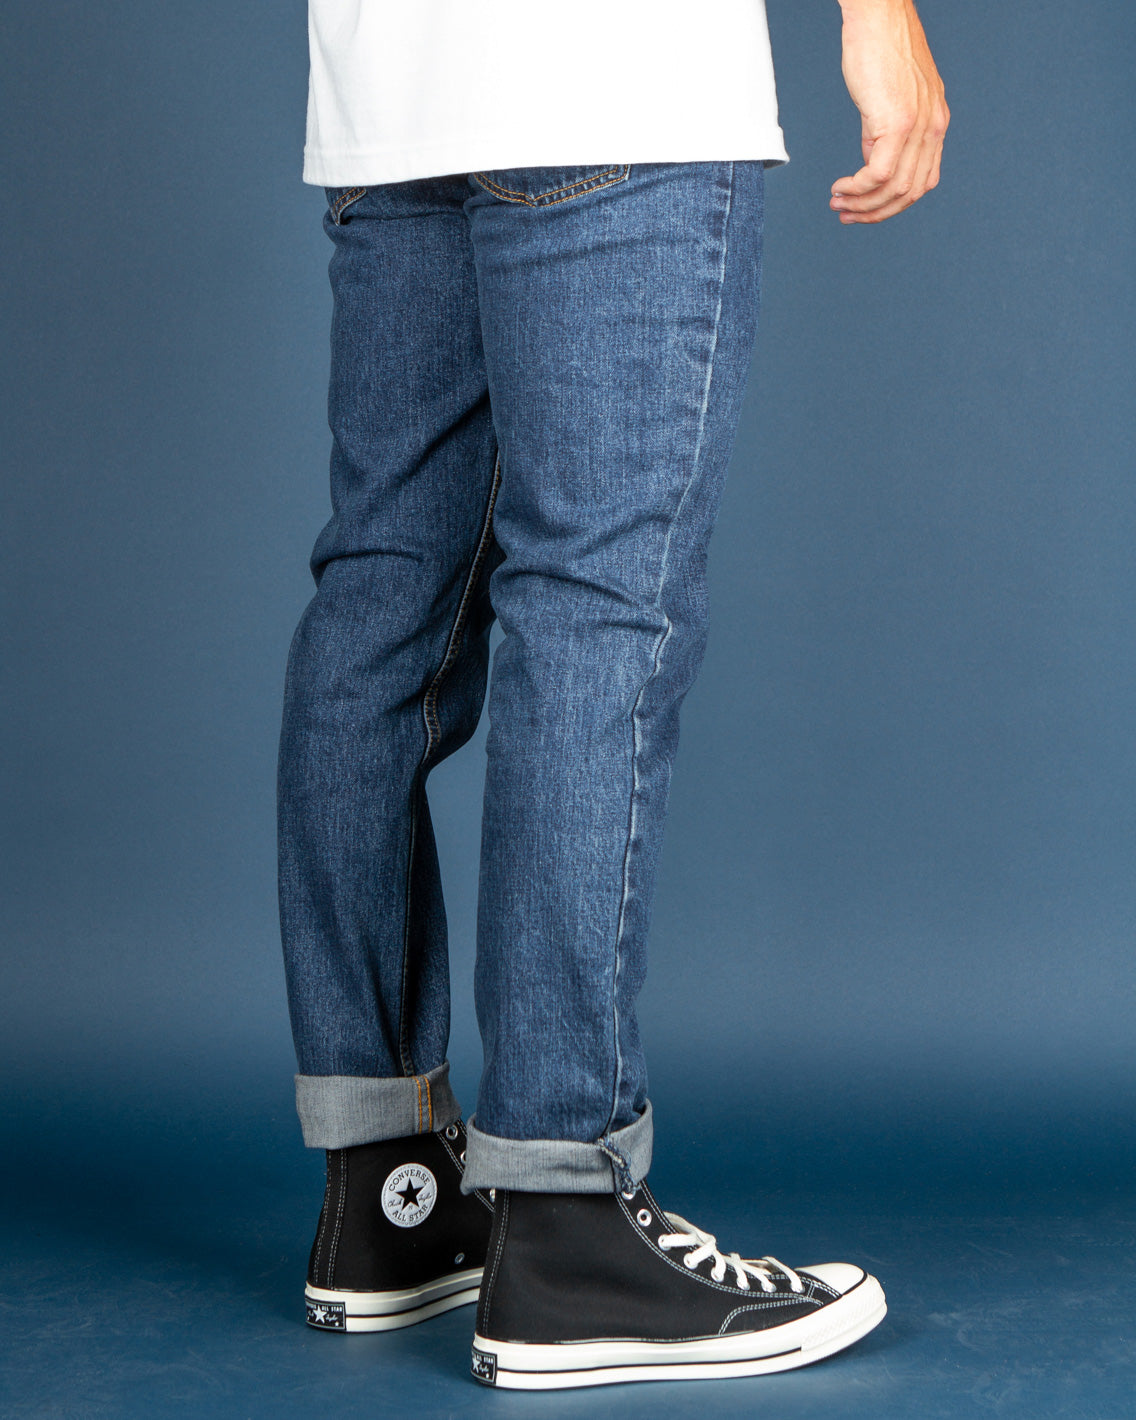 The Levi's 511 is a slim fit from hip to ankle. Features five pocket styling, zip fly, and is constructed with stretch denim in Dark Stonewash.